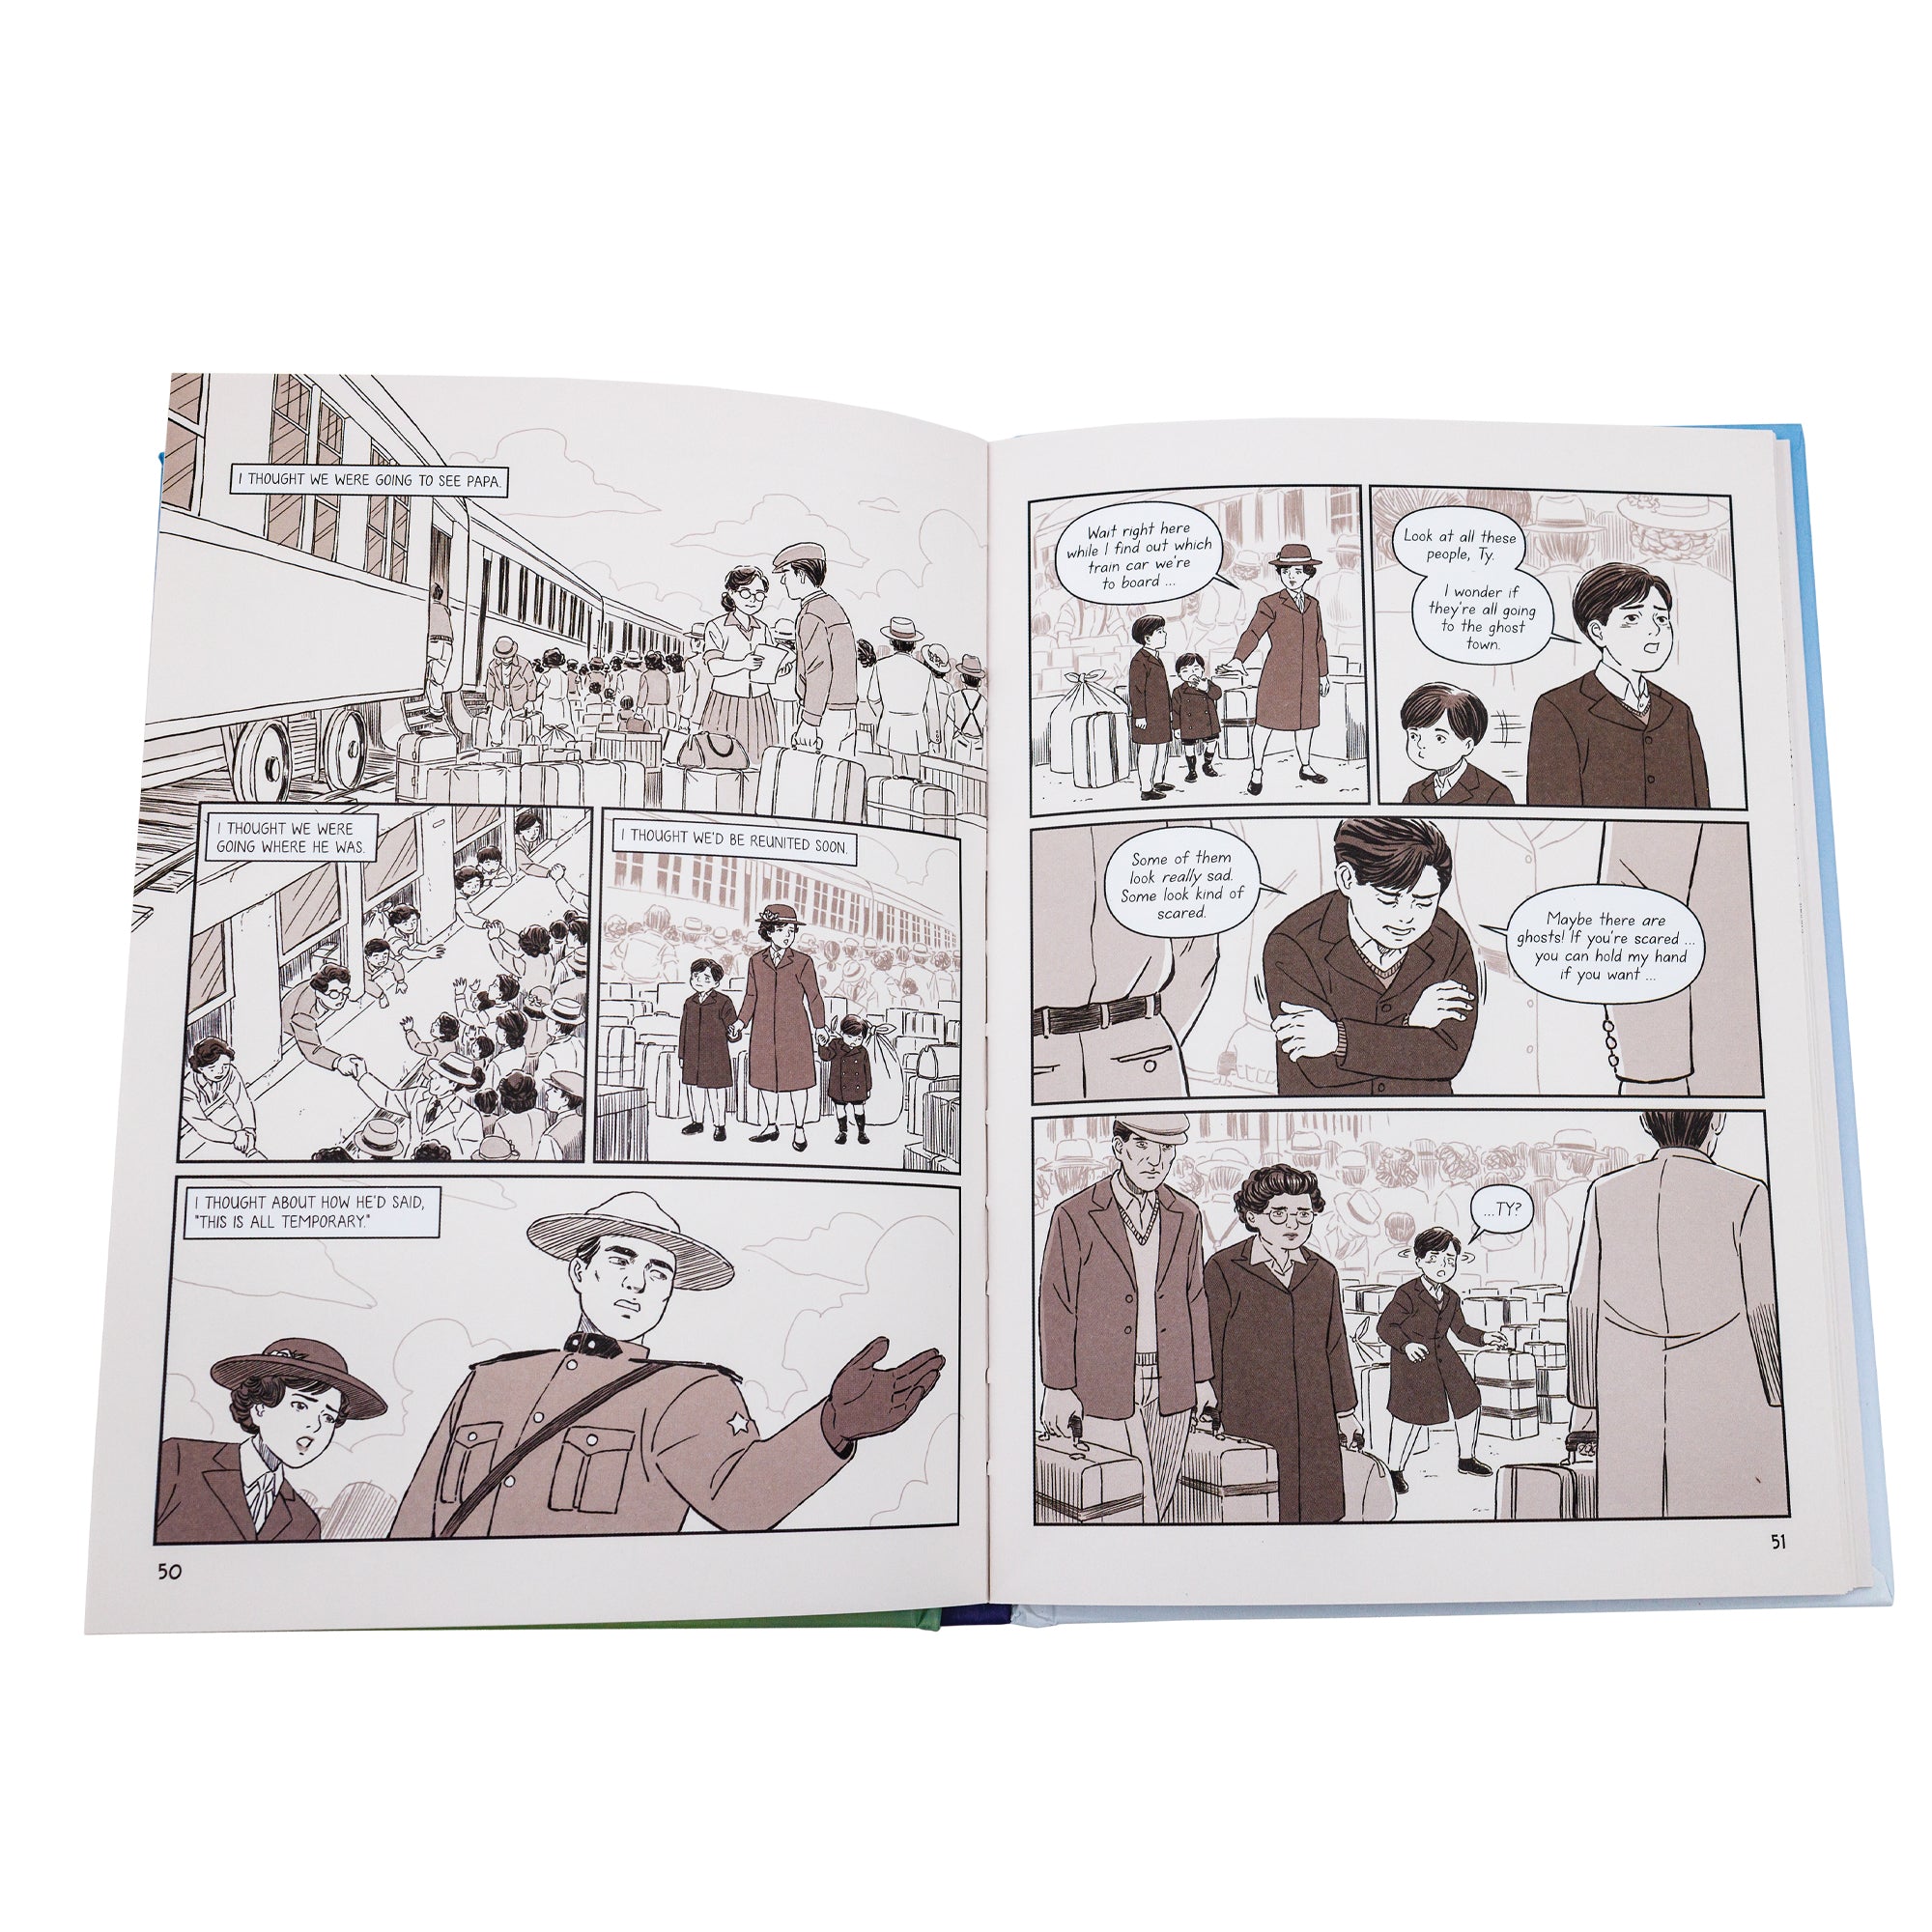 Stealing Home book open to show inside pages. The pages are in a comic book format. The part of the story on the pages shows a mother with her 2 boys departing a train and looking for their father, who wasn’t there. In the concern, the younger brother disappeared without notice.